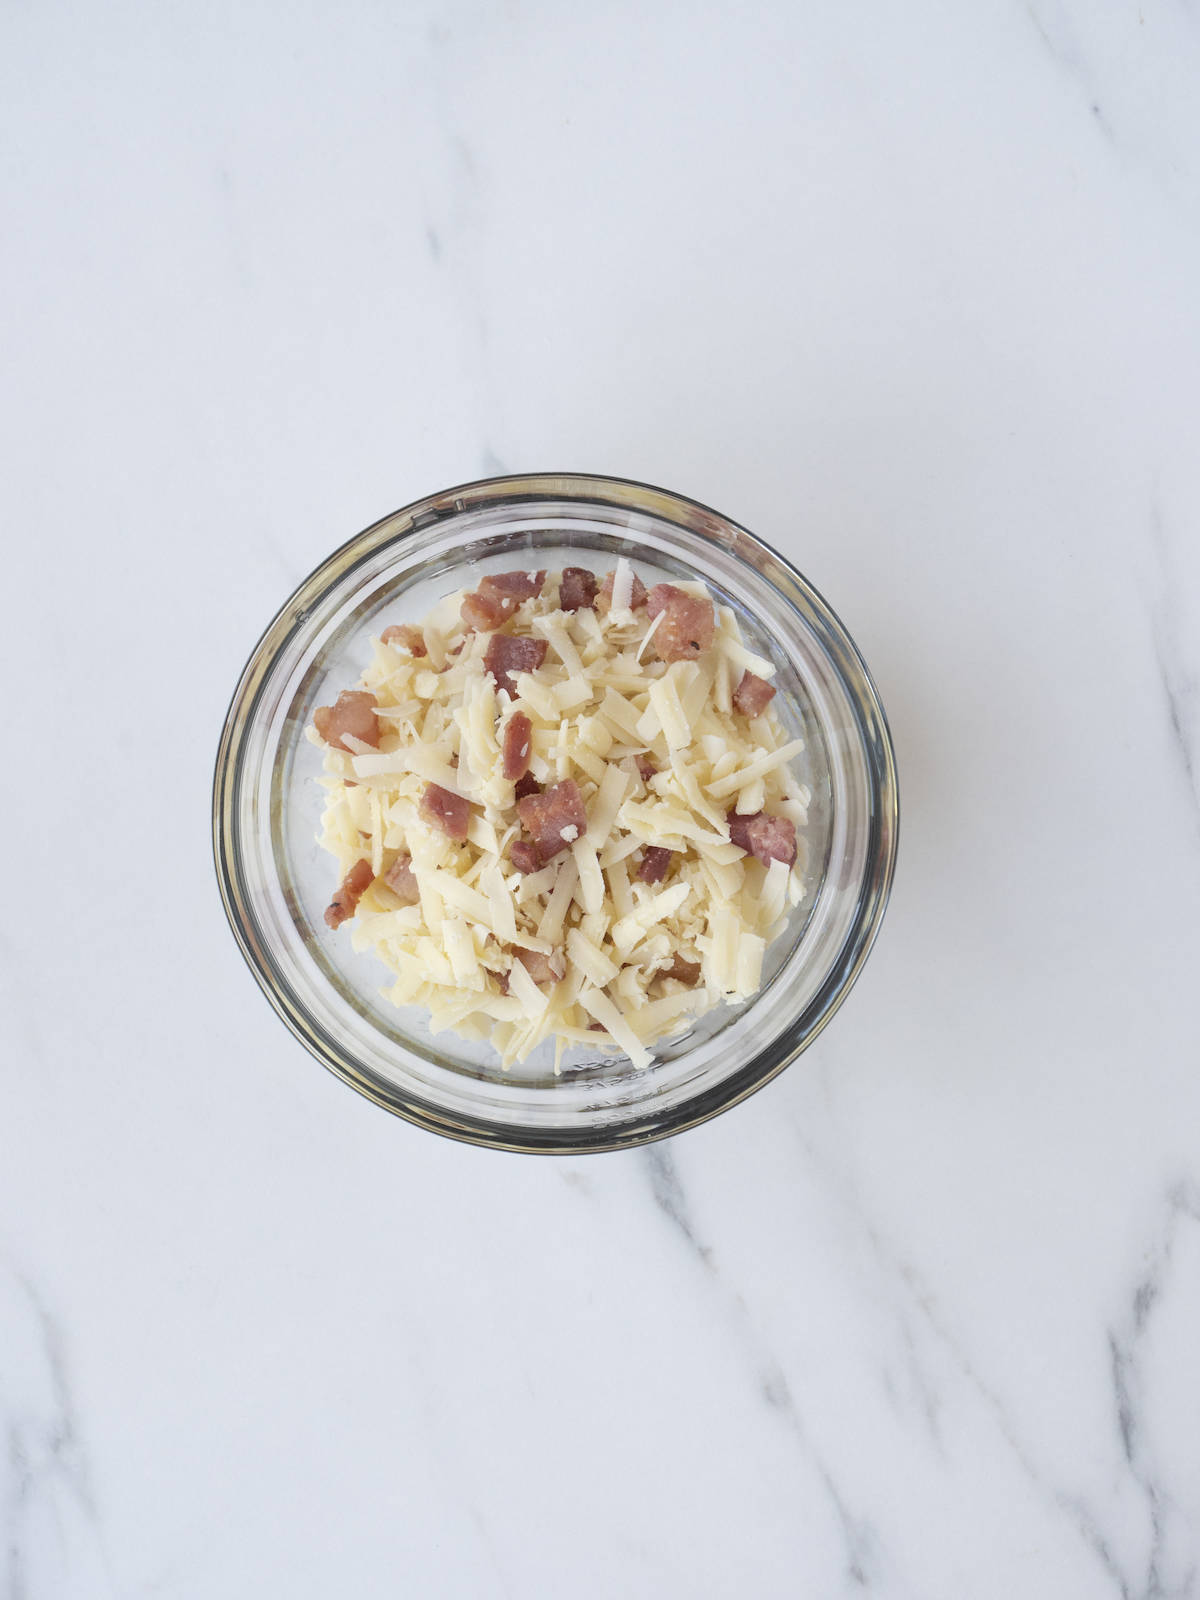 A small glass mixing bowl with a portion of cheese and cooked pancetta mix.